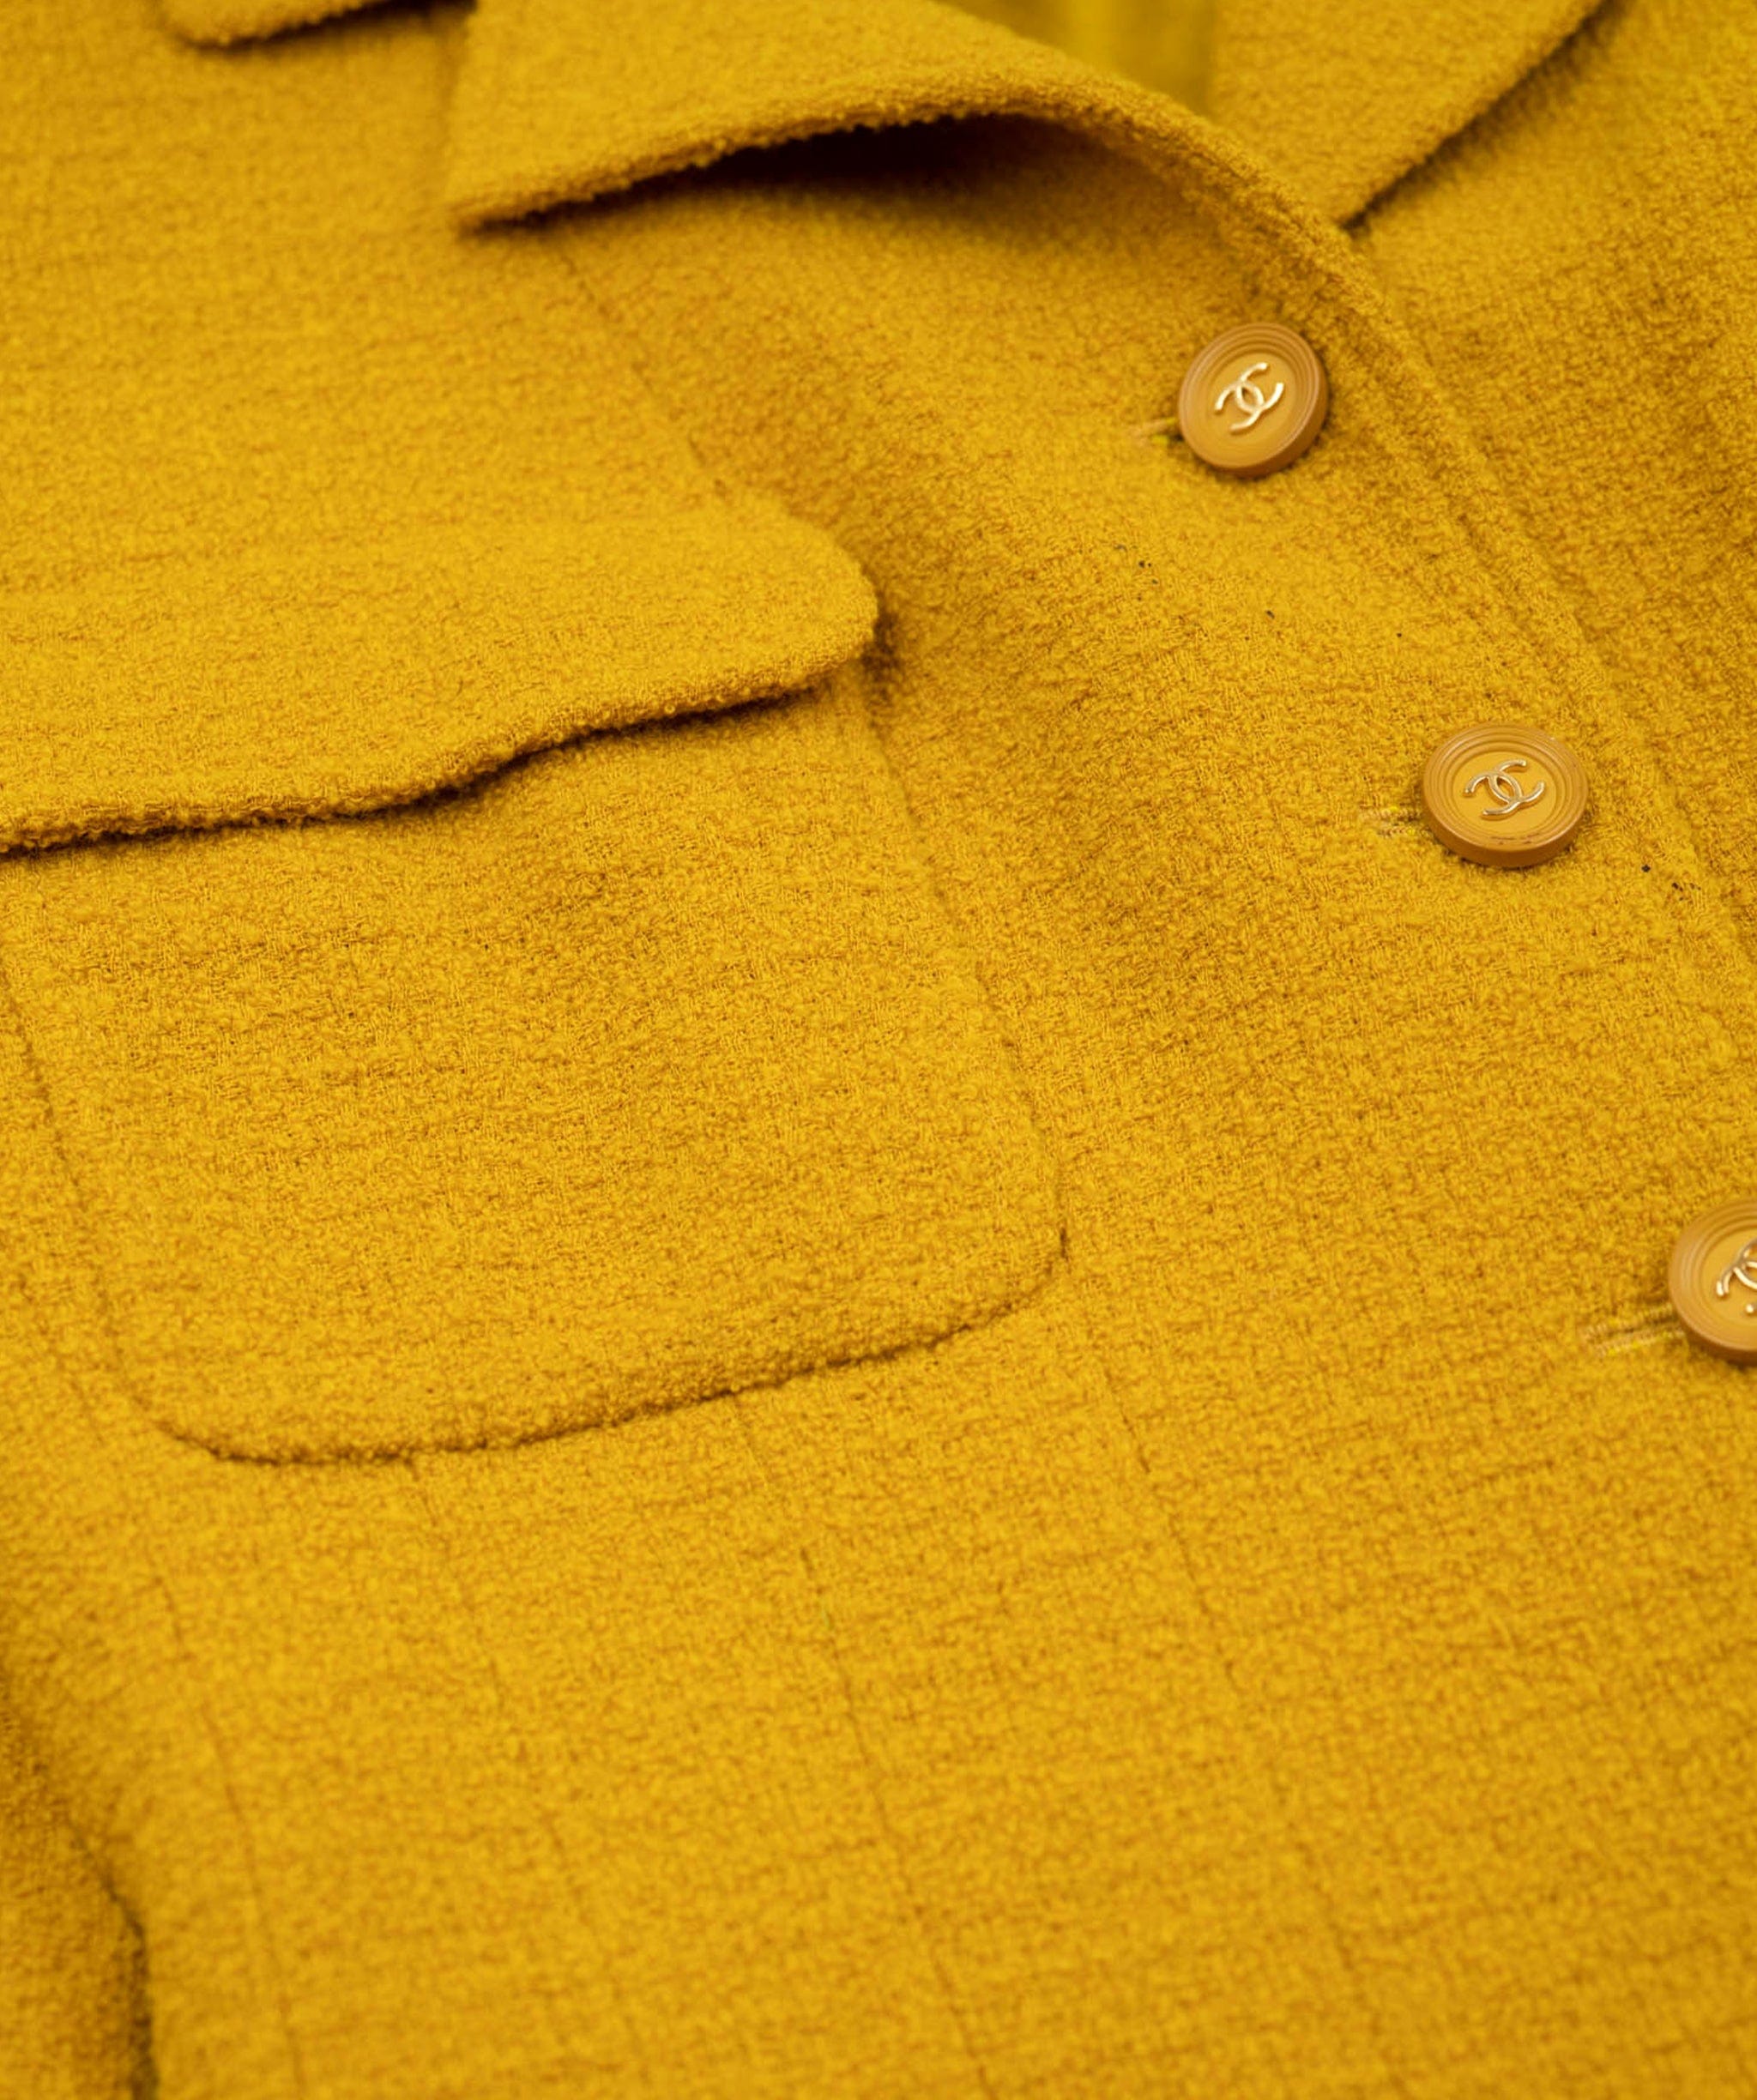 Chanel Chanel mustard yellow boucle jacket with round CC logo buttons, 95A AEL1083